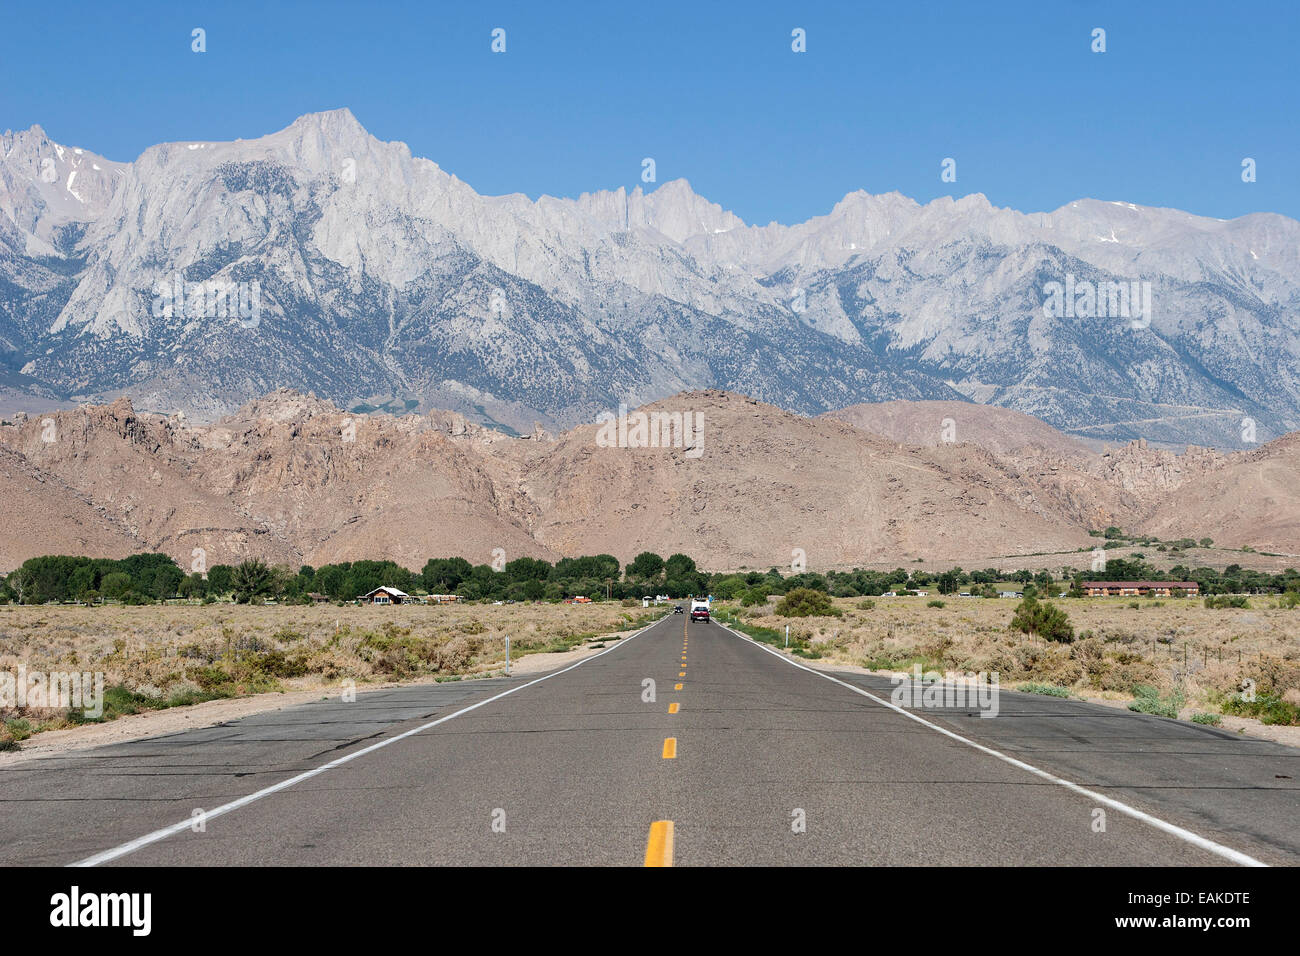 Highway no. 136, near Lone Pine, the mountains of the Sierra Nevada at the back, California, United States Stock Photo